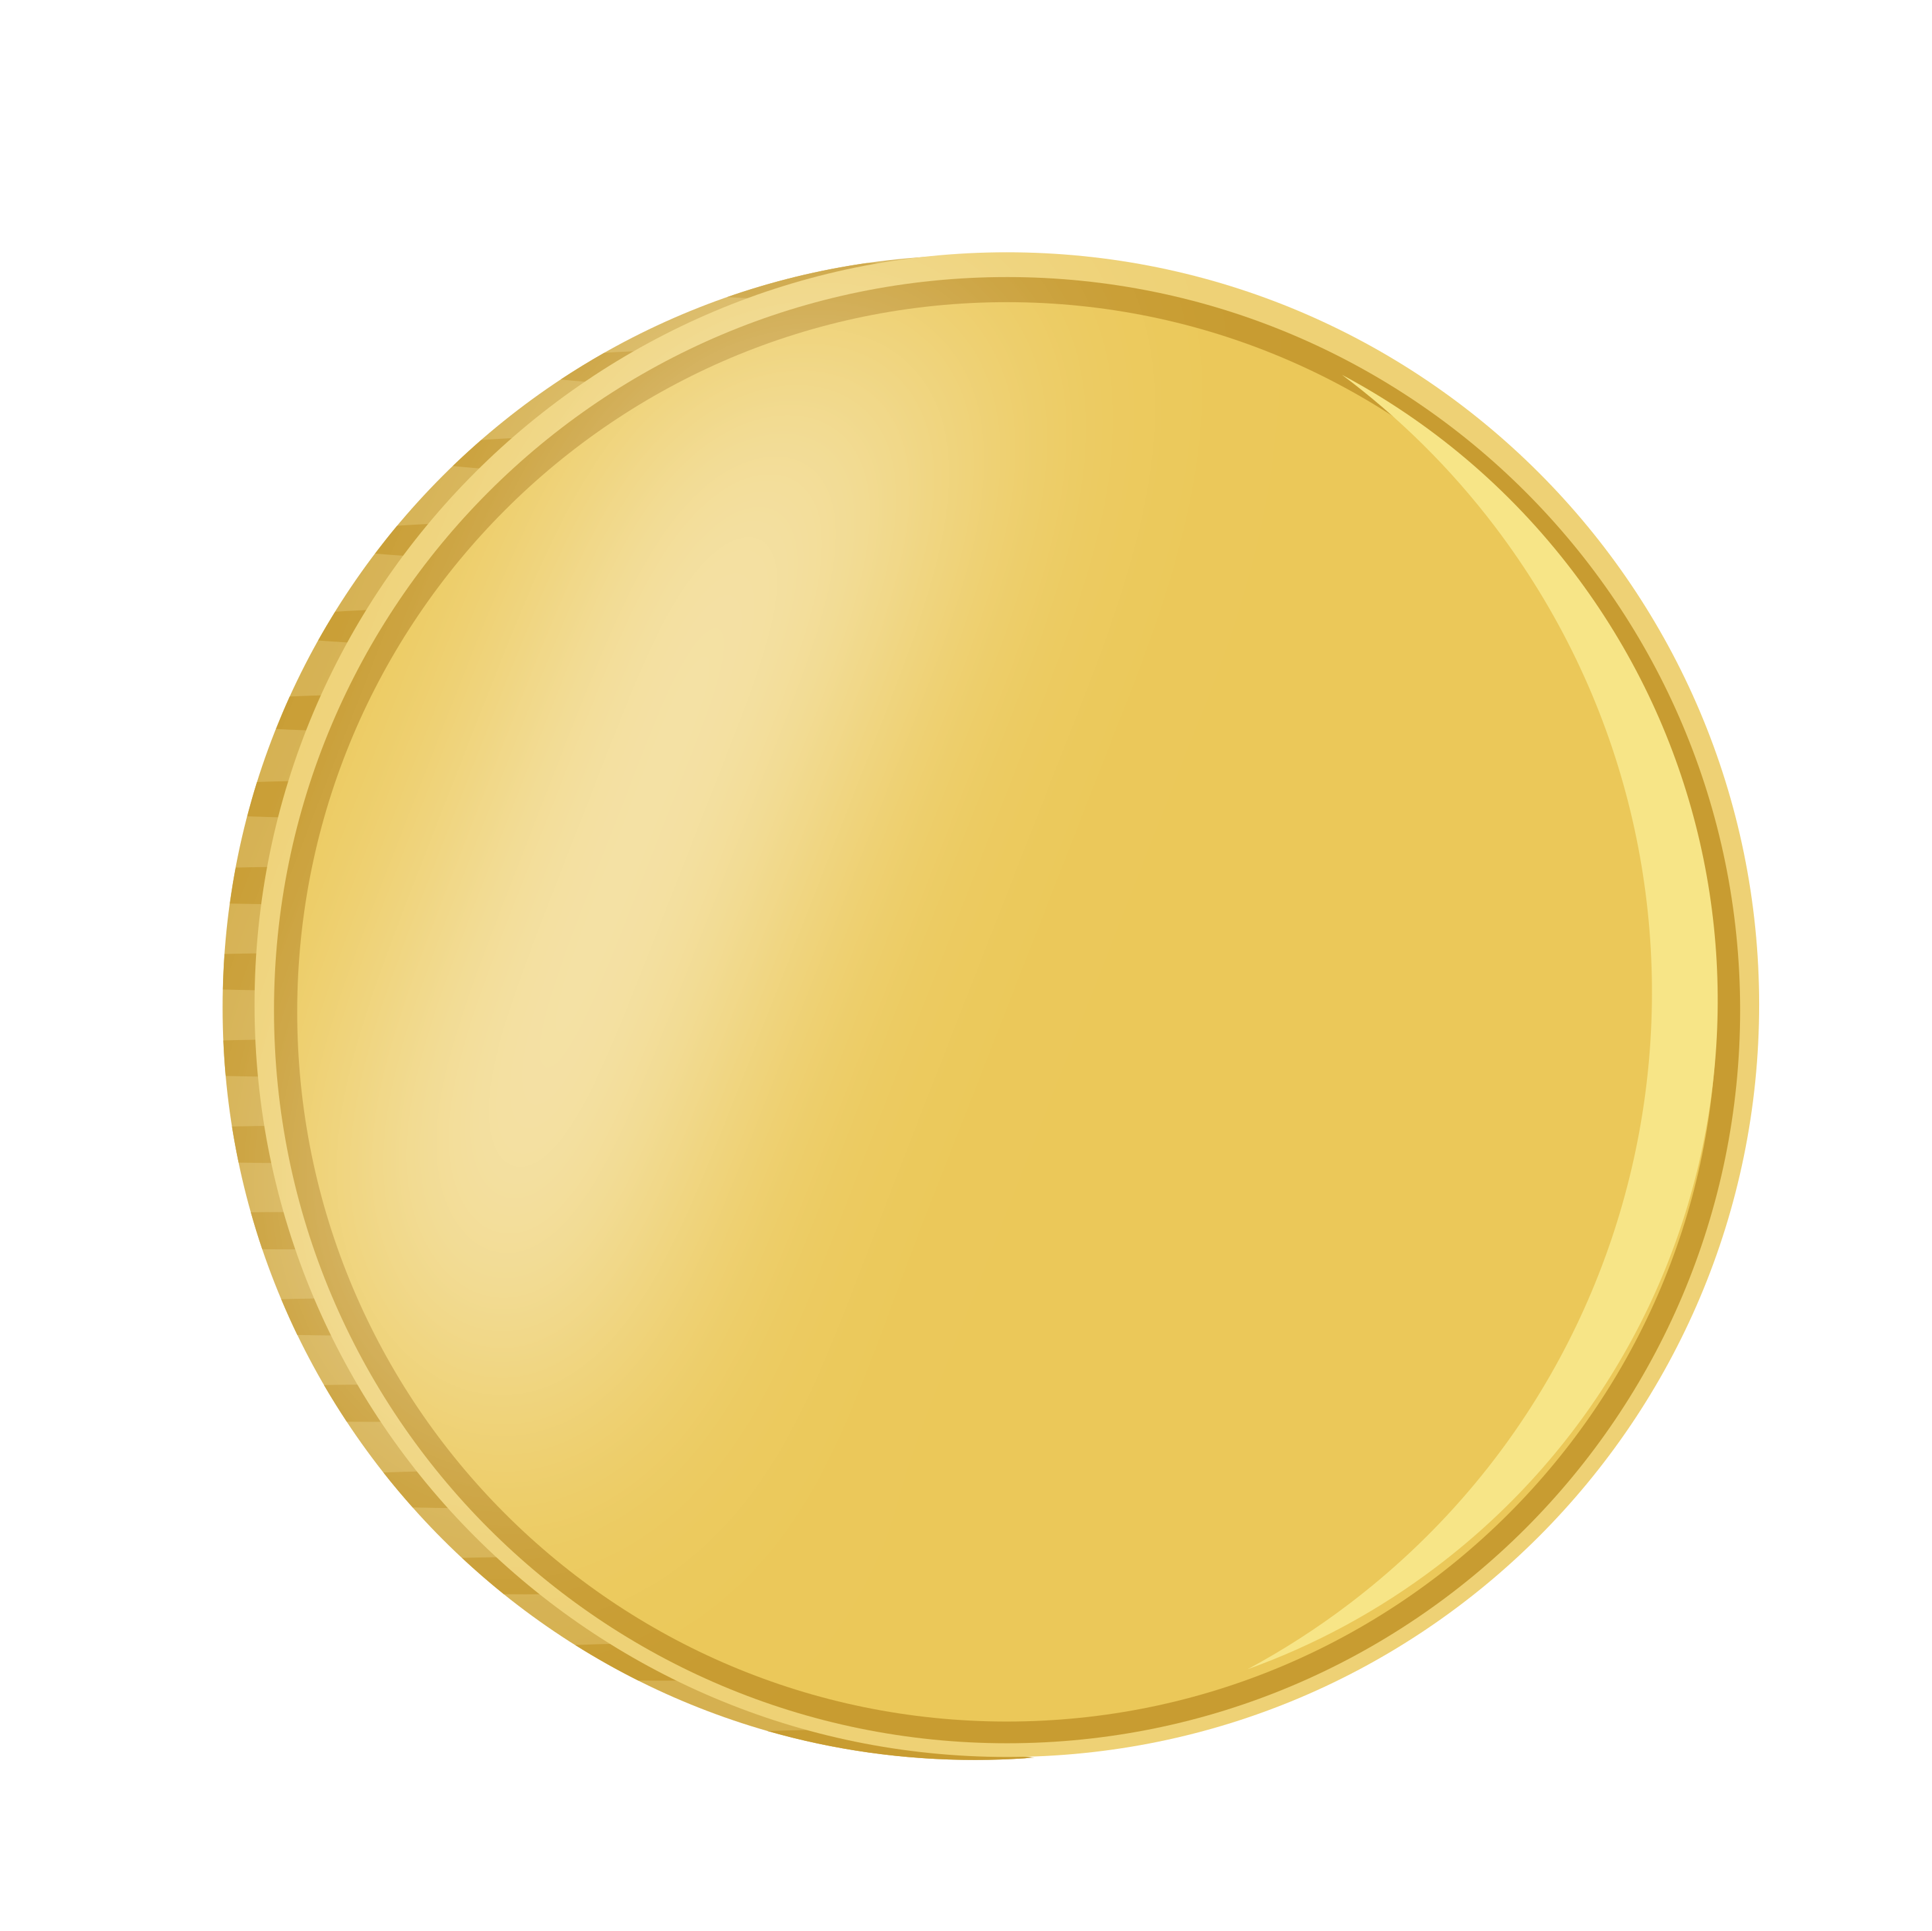 Coin PNG Image in High Definition